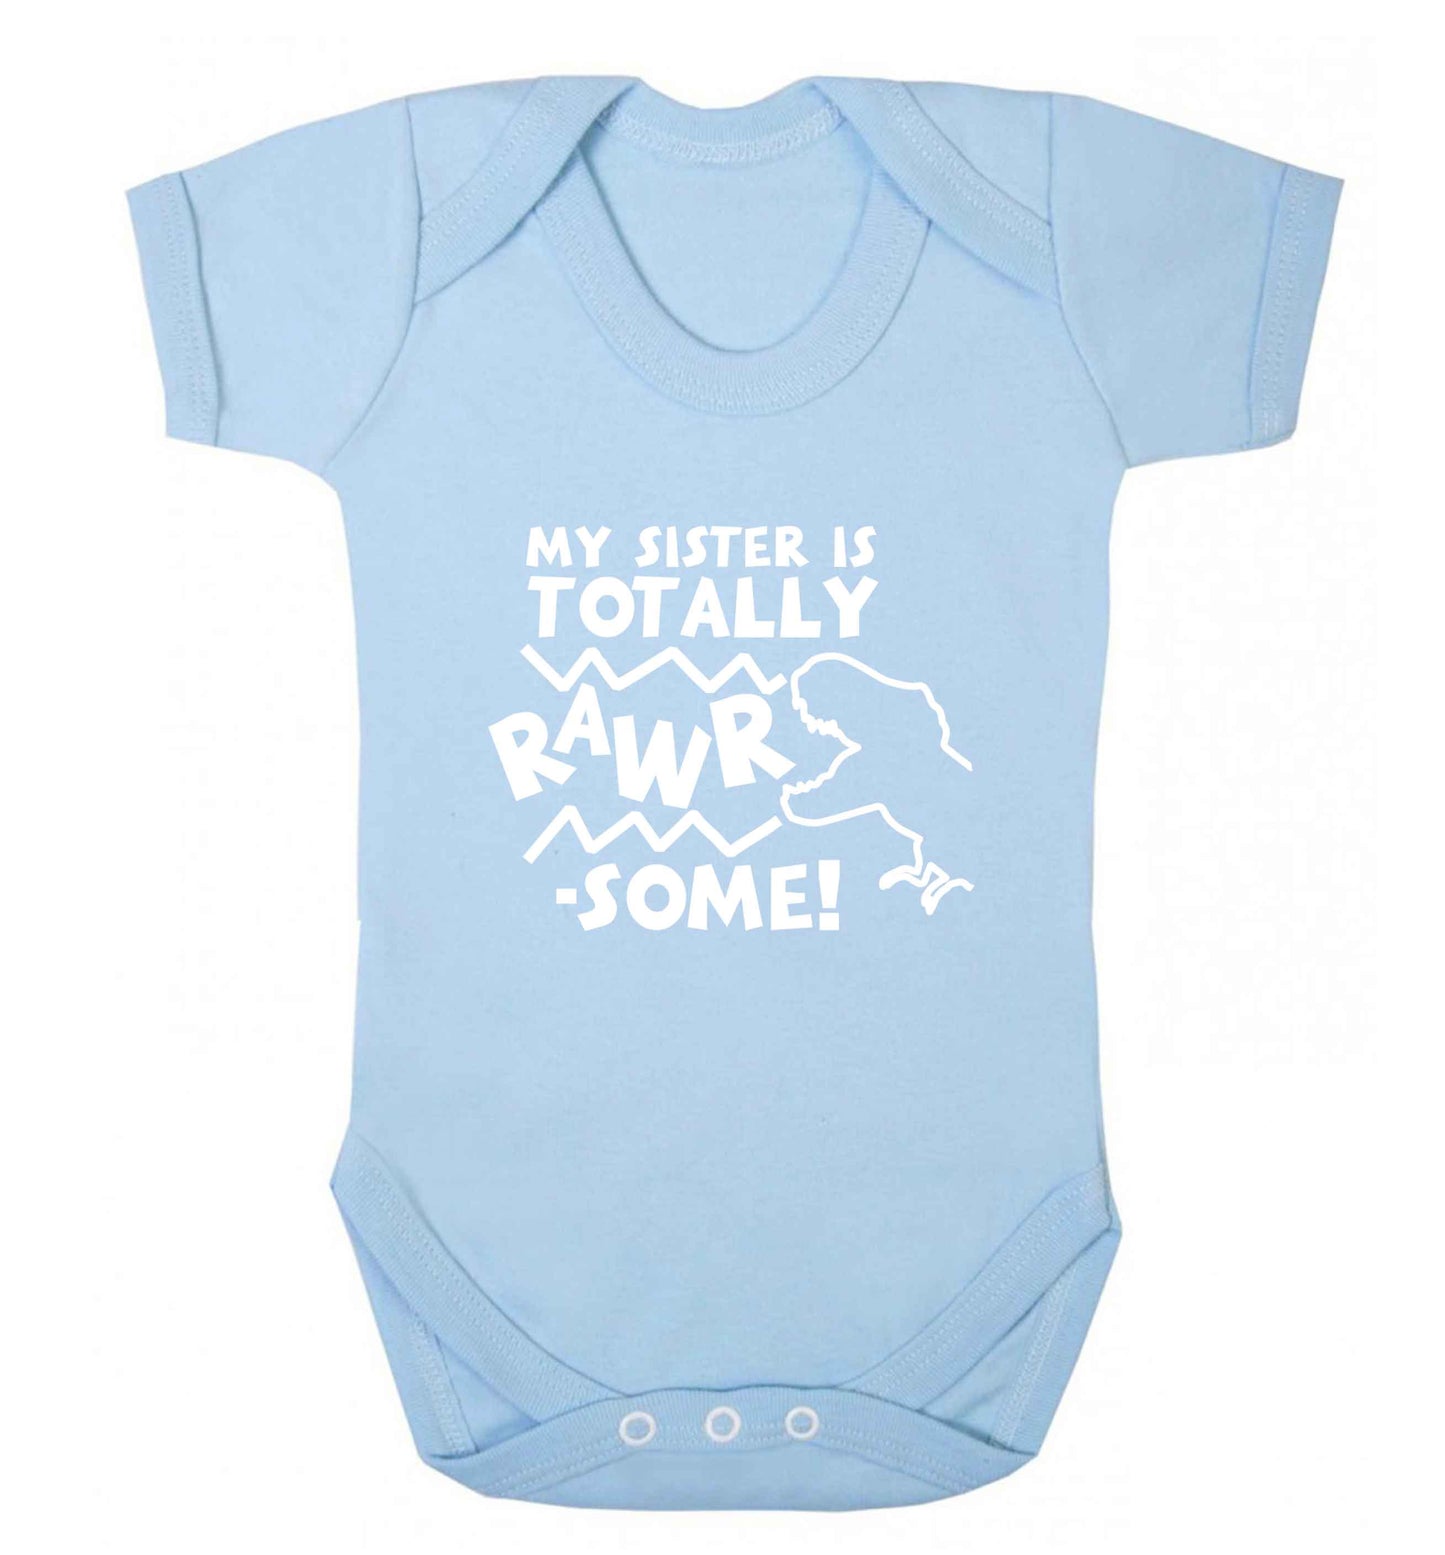 My sister is totally rawrsome baby vest pale blue 18-24 months